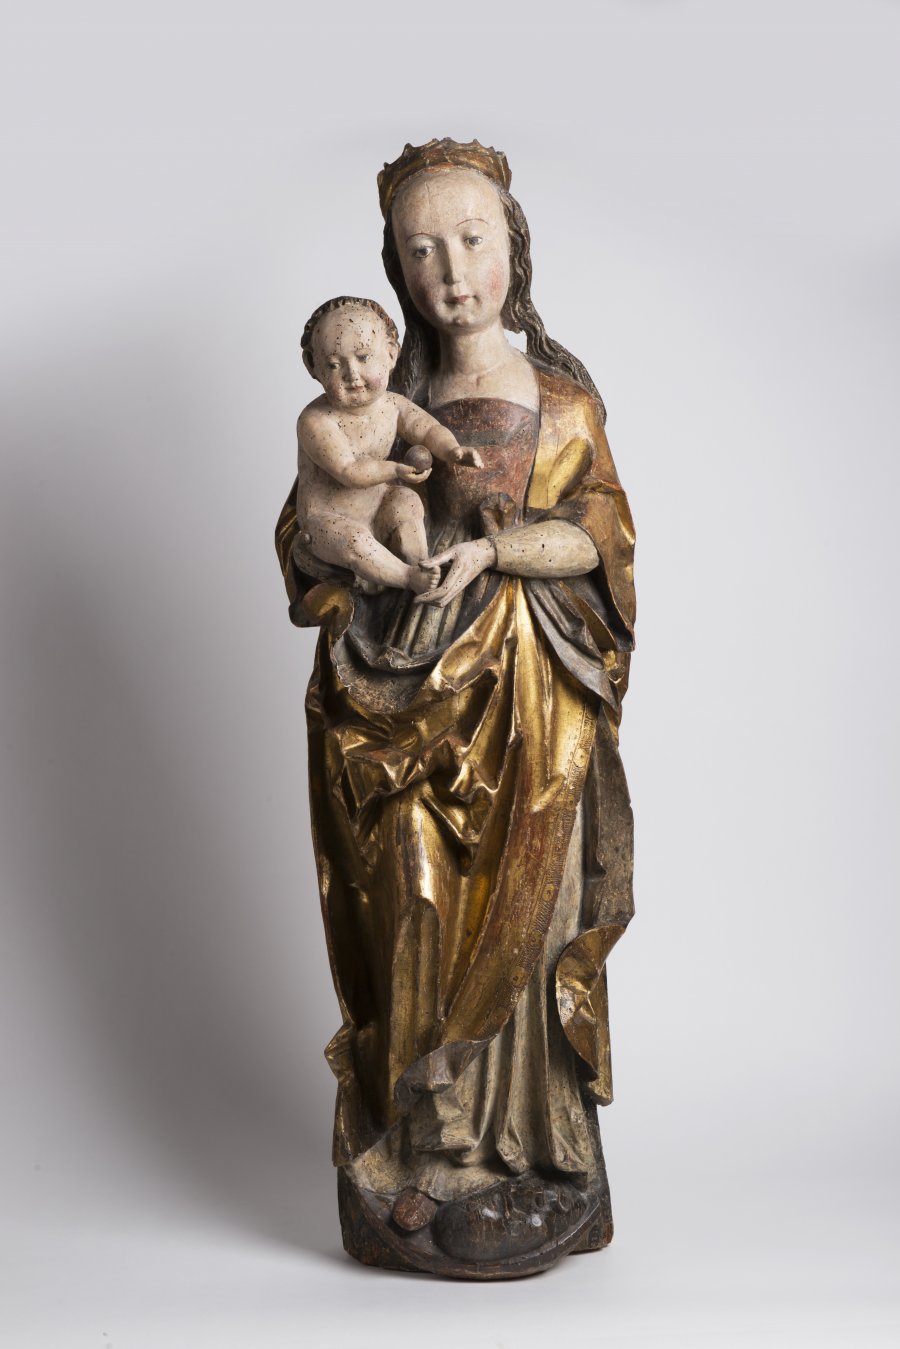 A LATE GOTHIC MADONNA